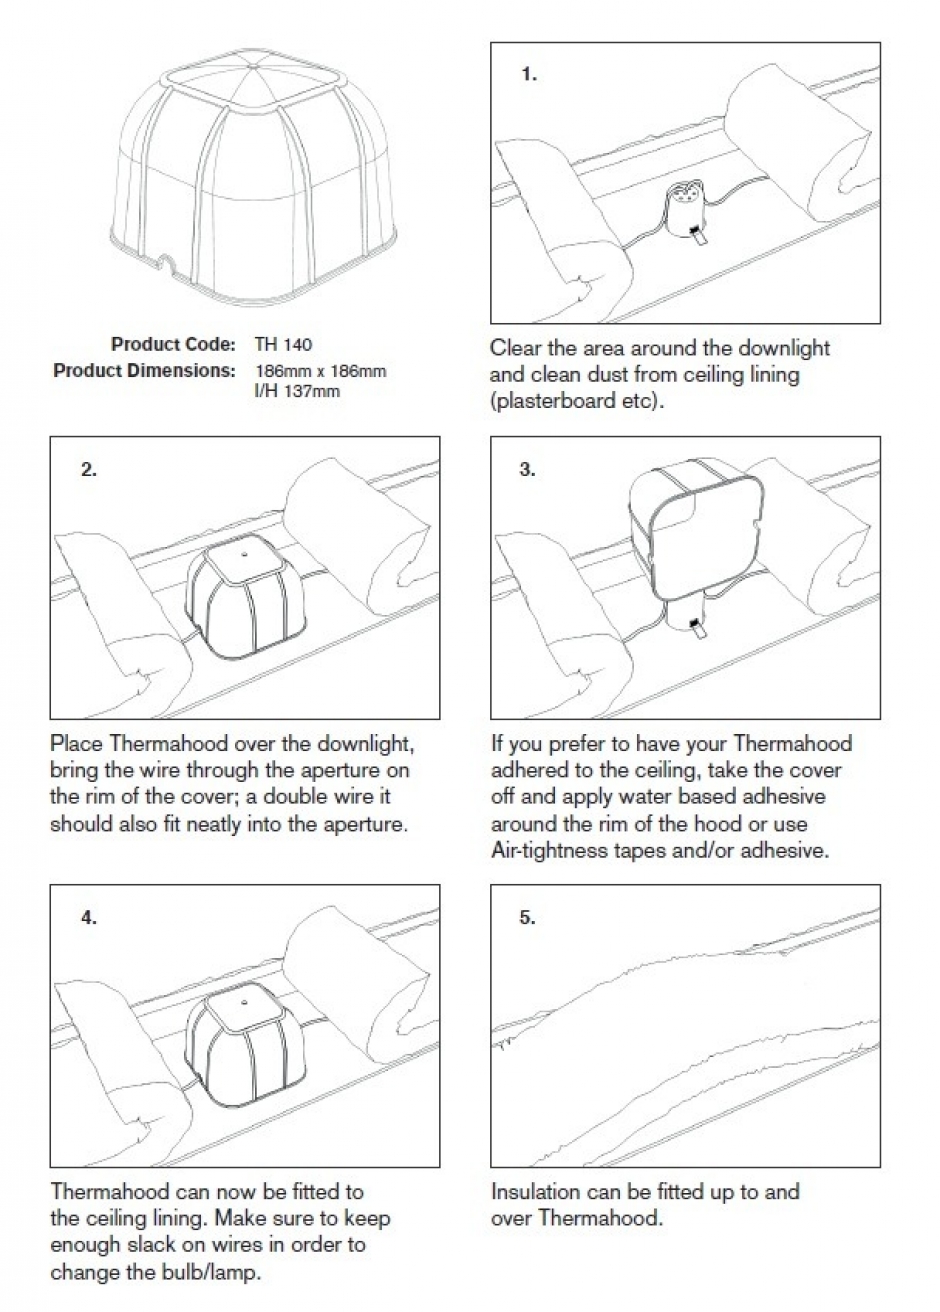 Thermahood step by step guide to fitting